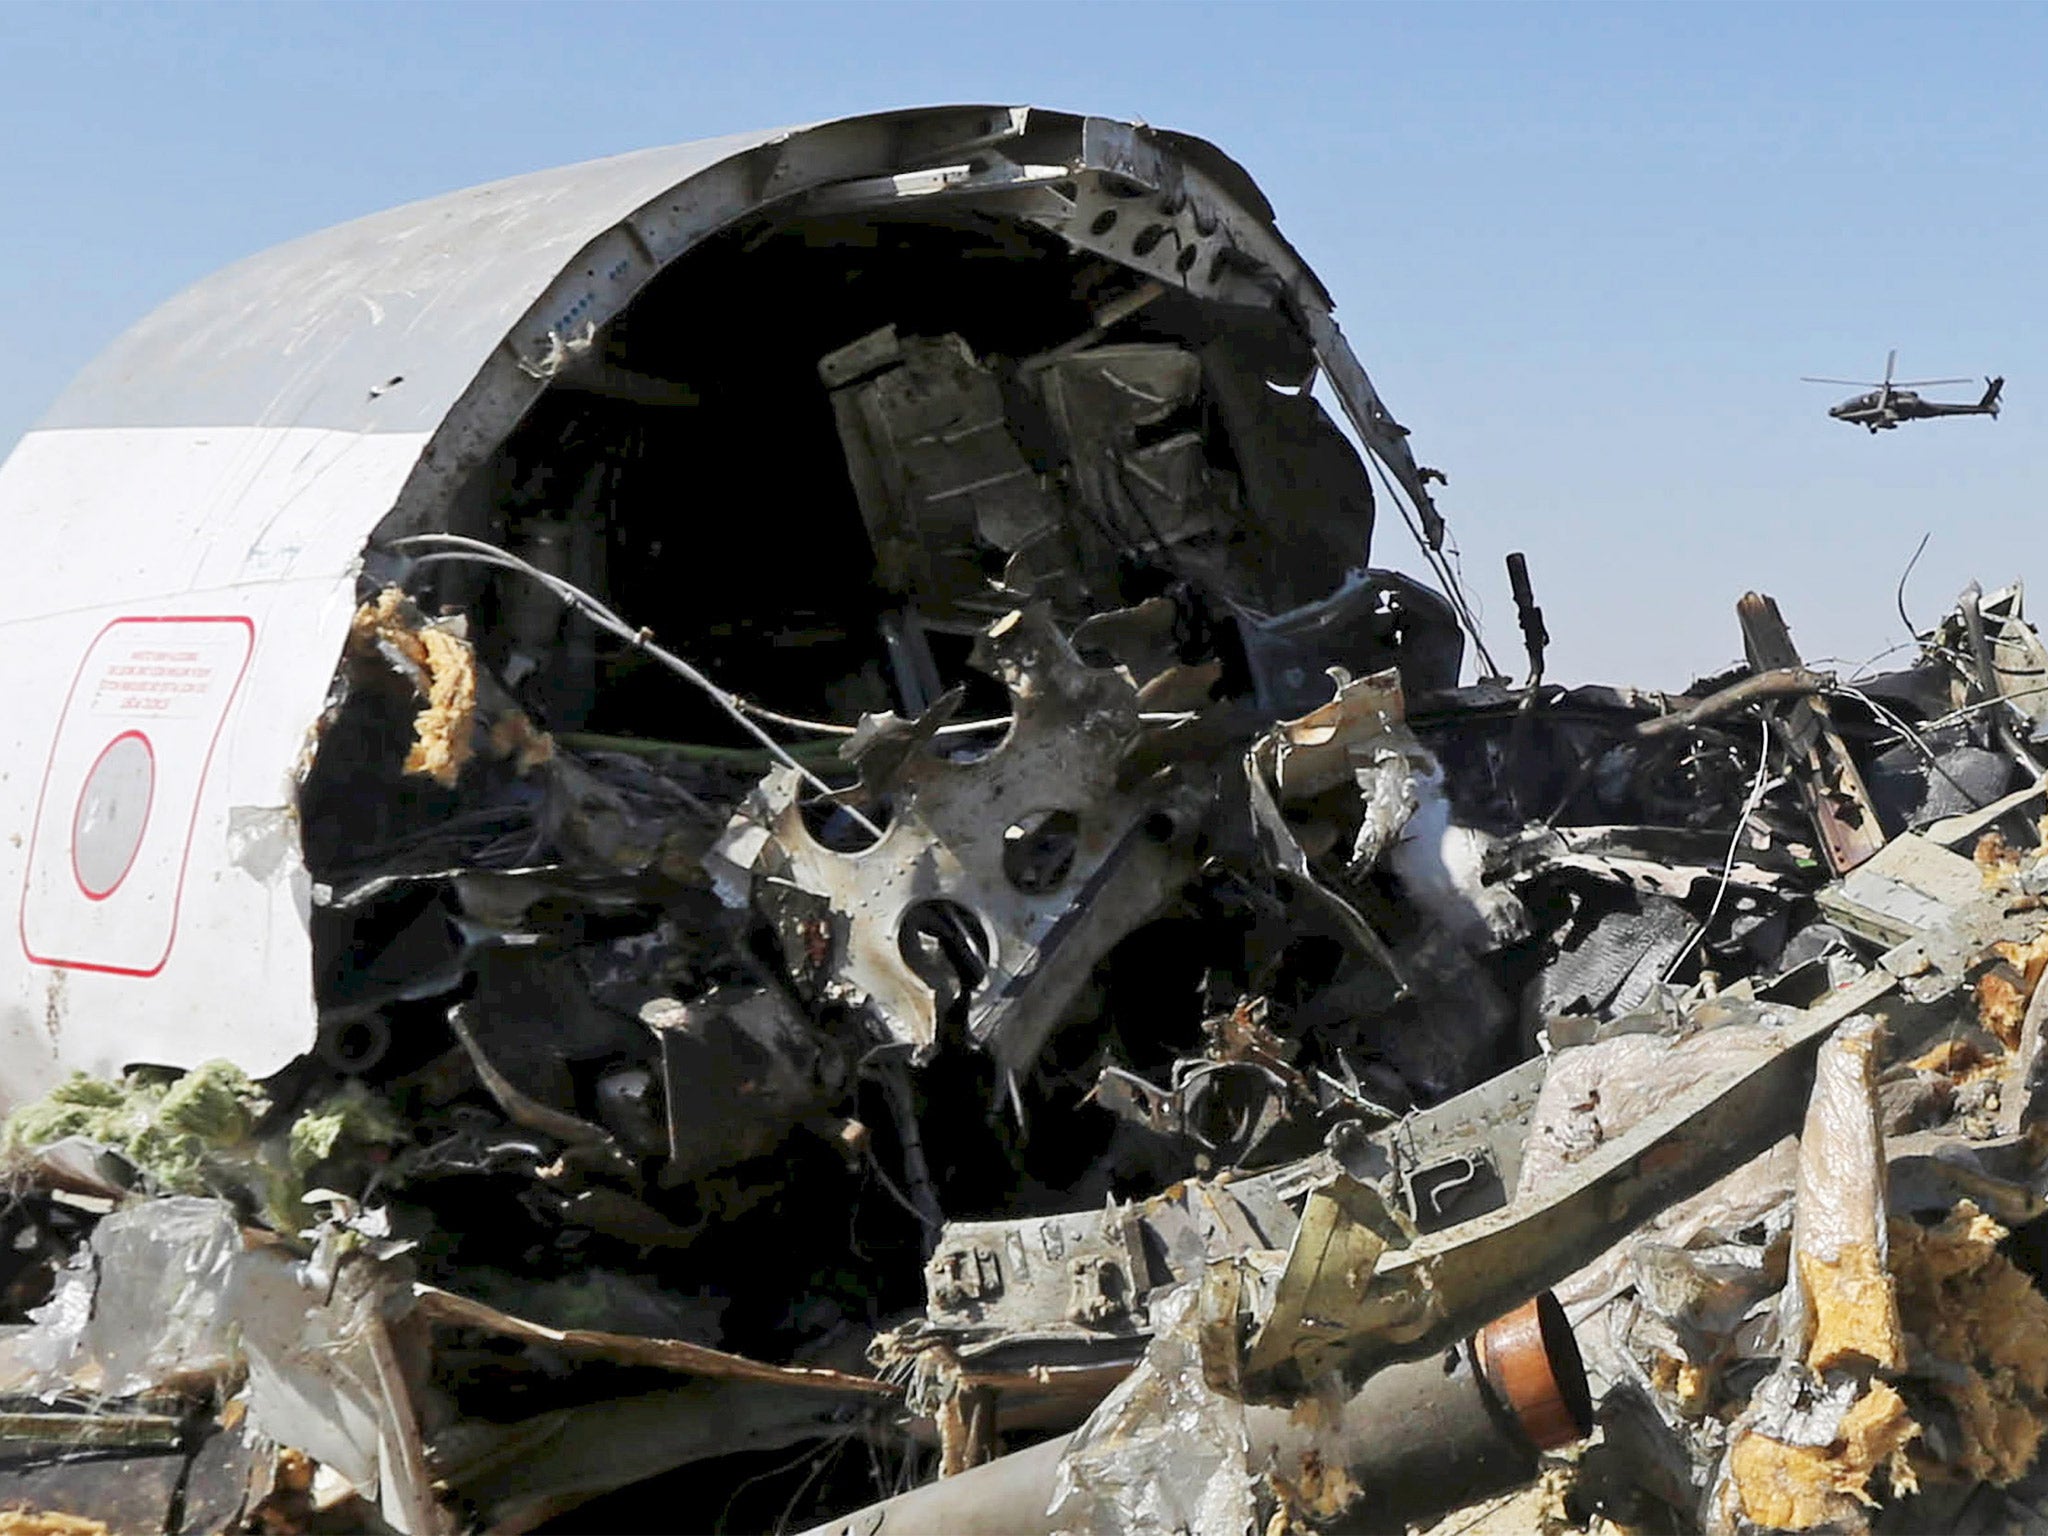 The debris of the Russian airliner which is being examined by Russian and Egyptian experts